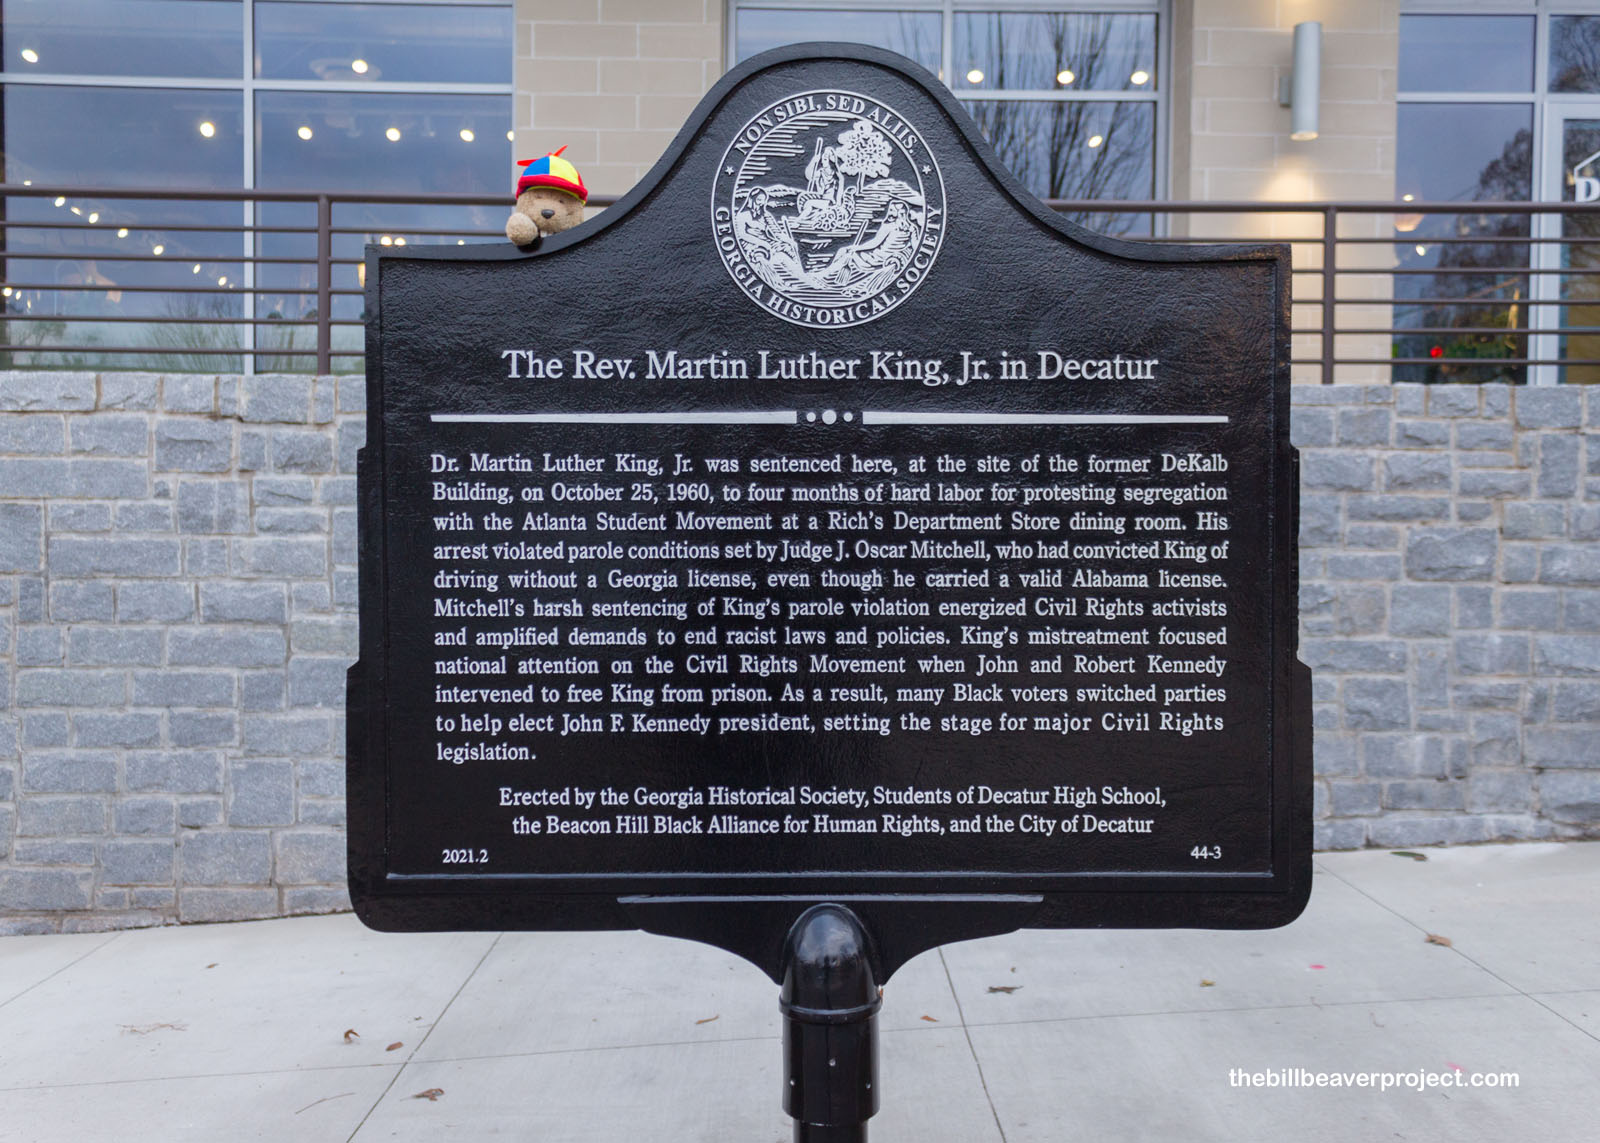 The Rev. Martin Luther King, Jr. in Decatur